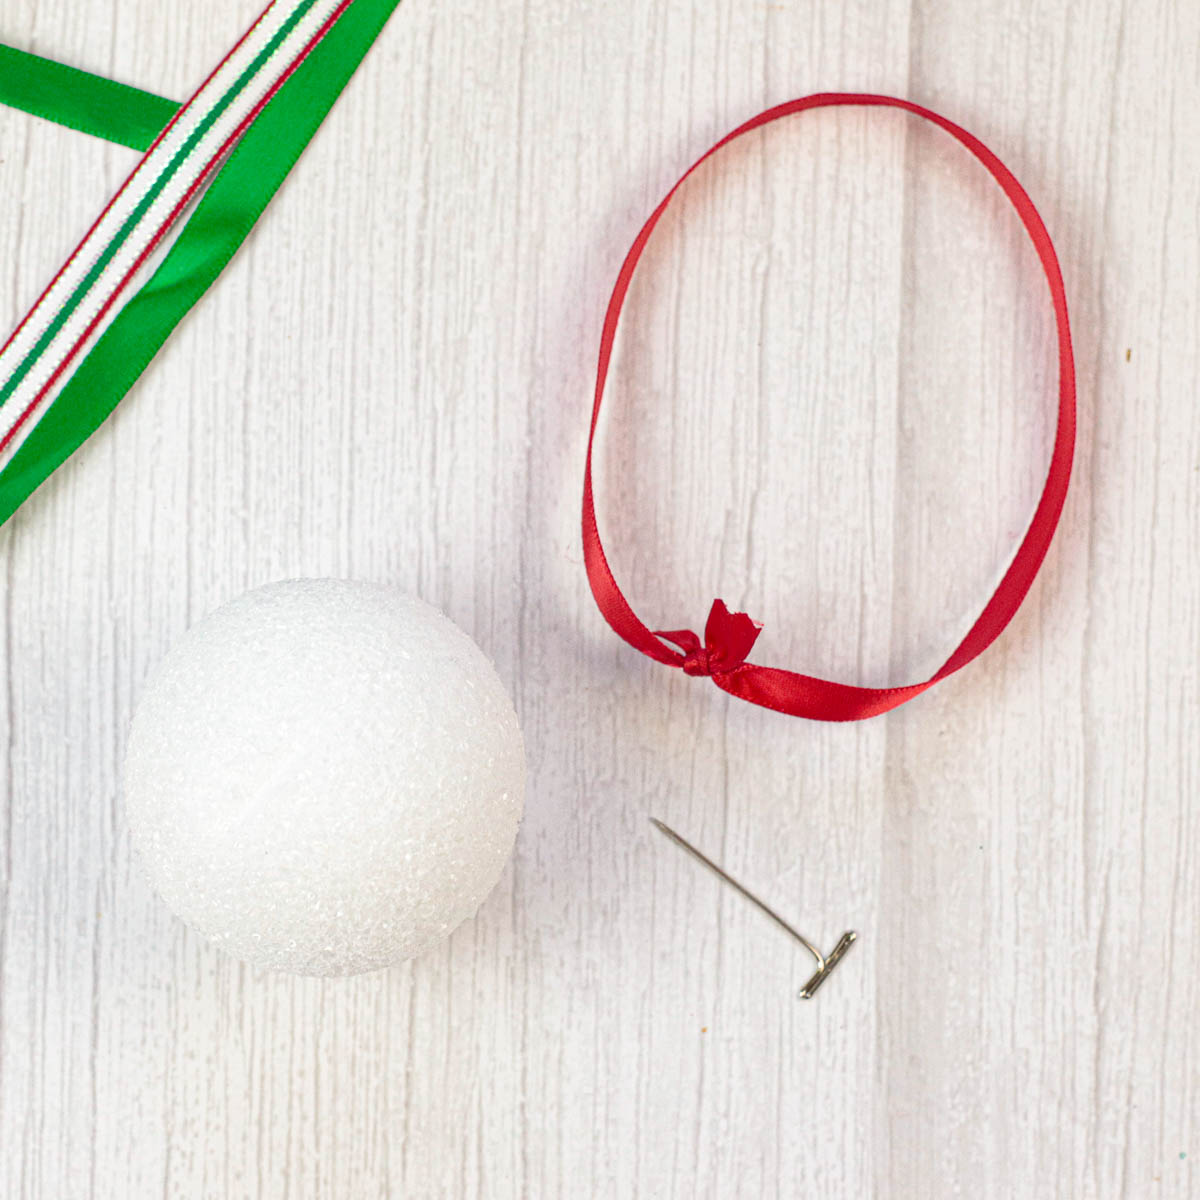 Christmas ribbon tied in a loop next to a Styrofoam ball.